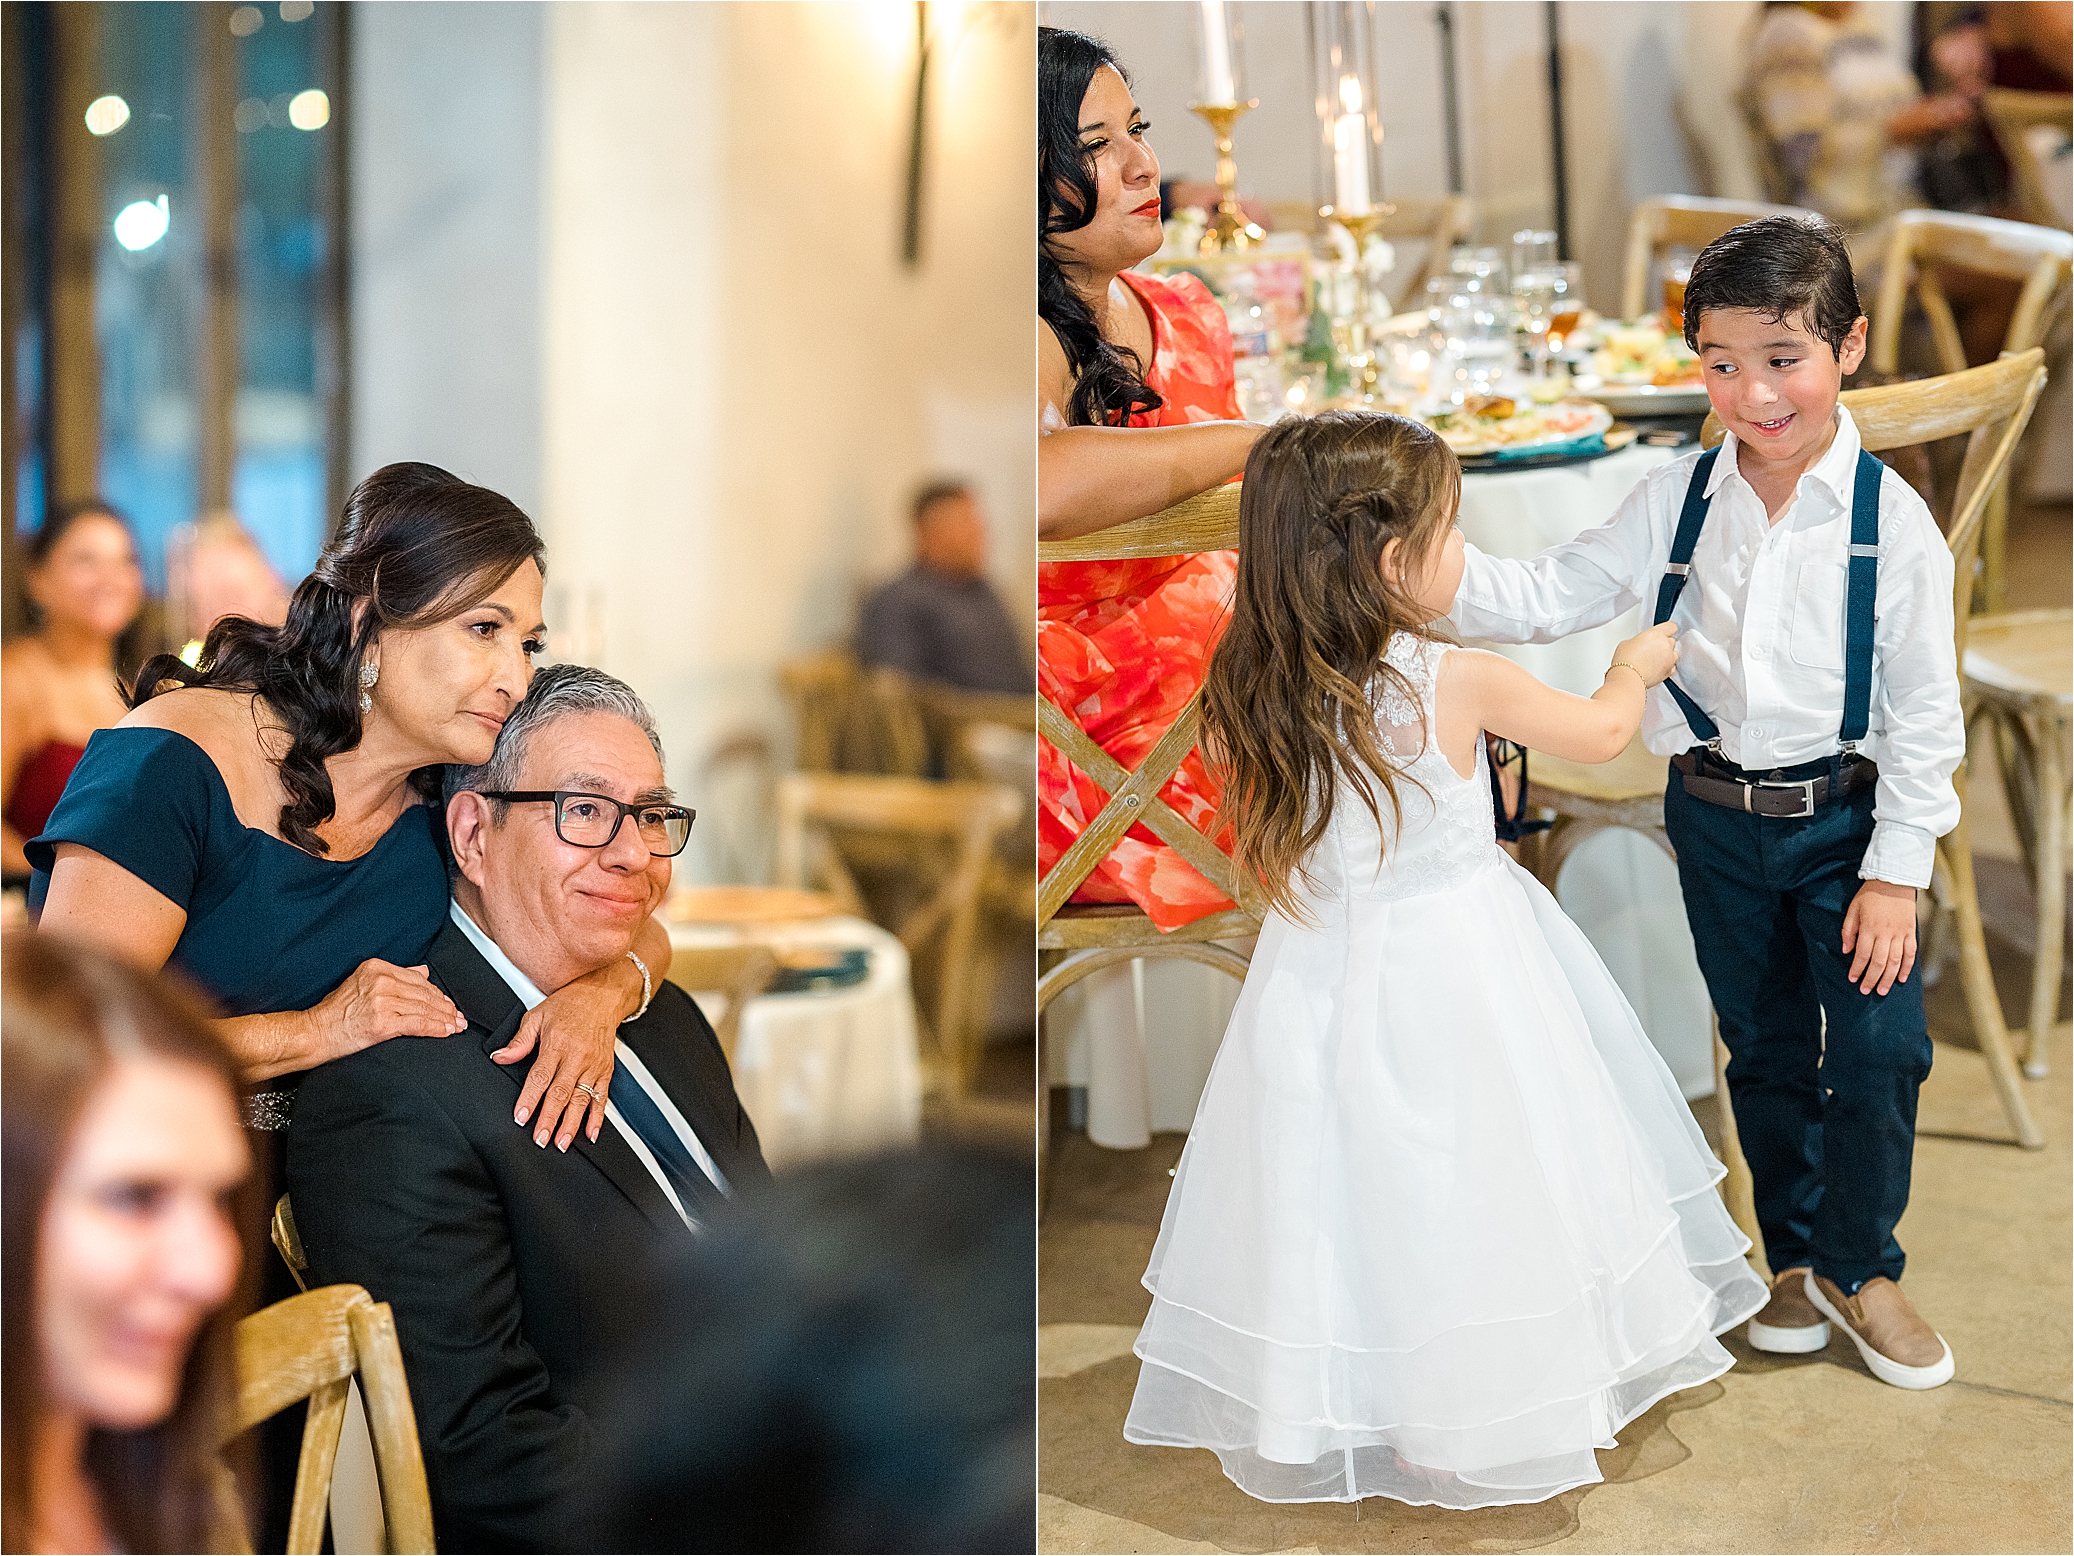 A flower girl and ring bearer share a funny moment at Lost Mission Wedding Reception near San Antonio, Texas 